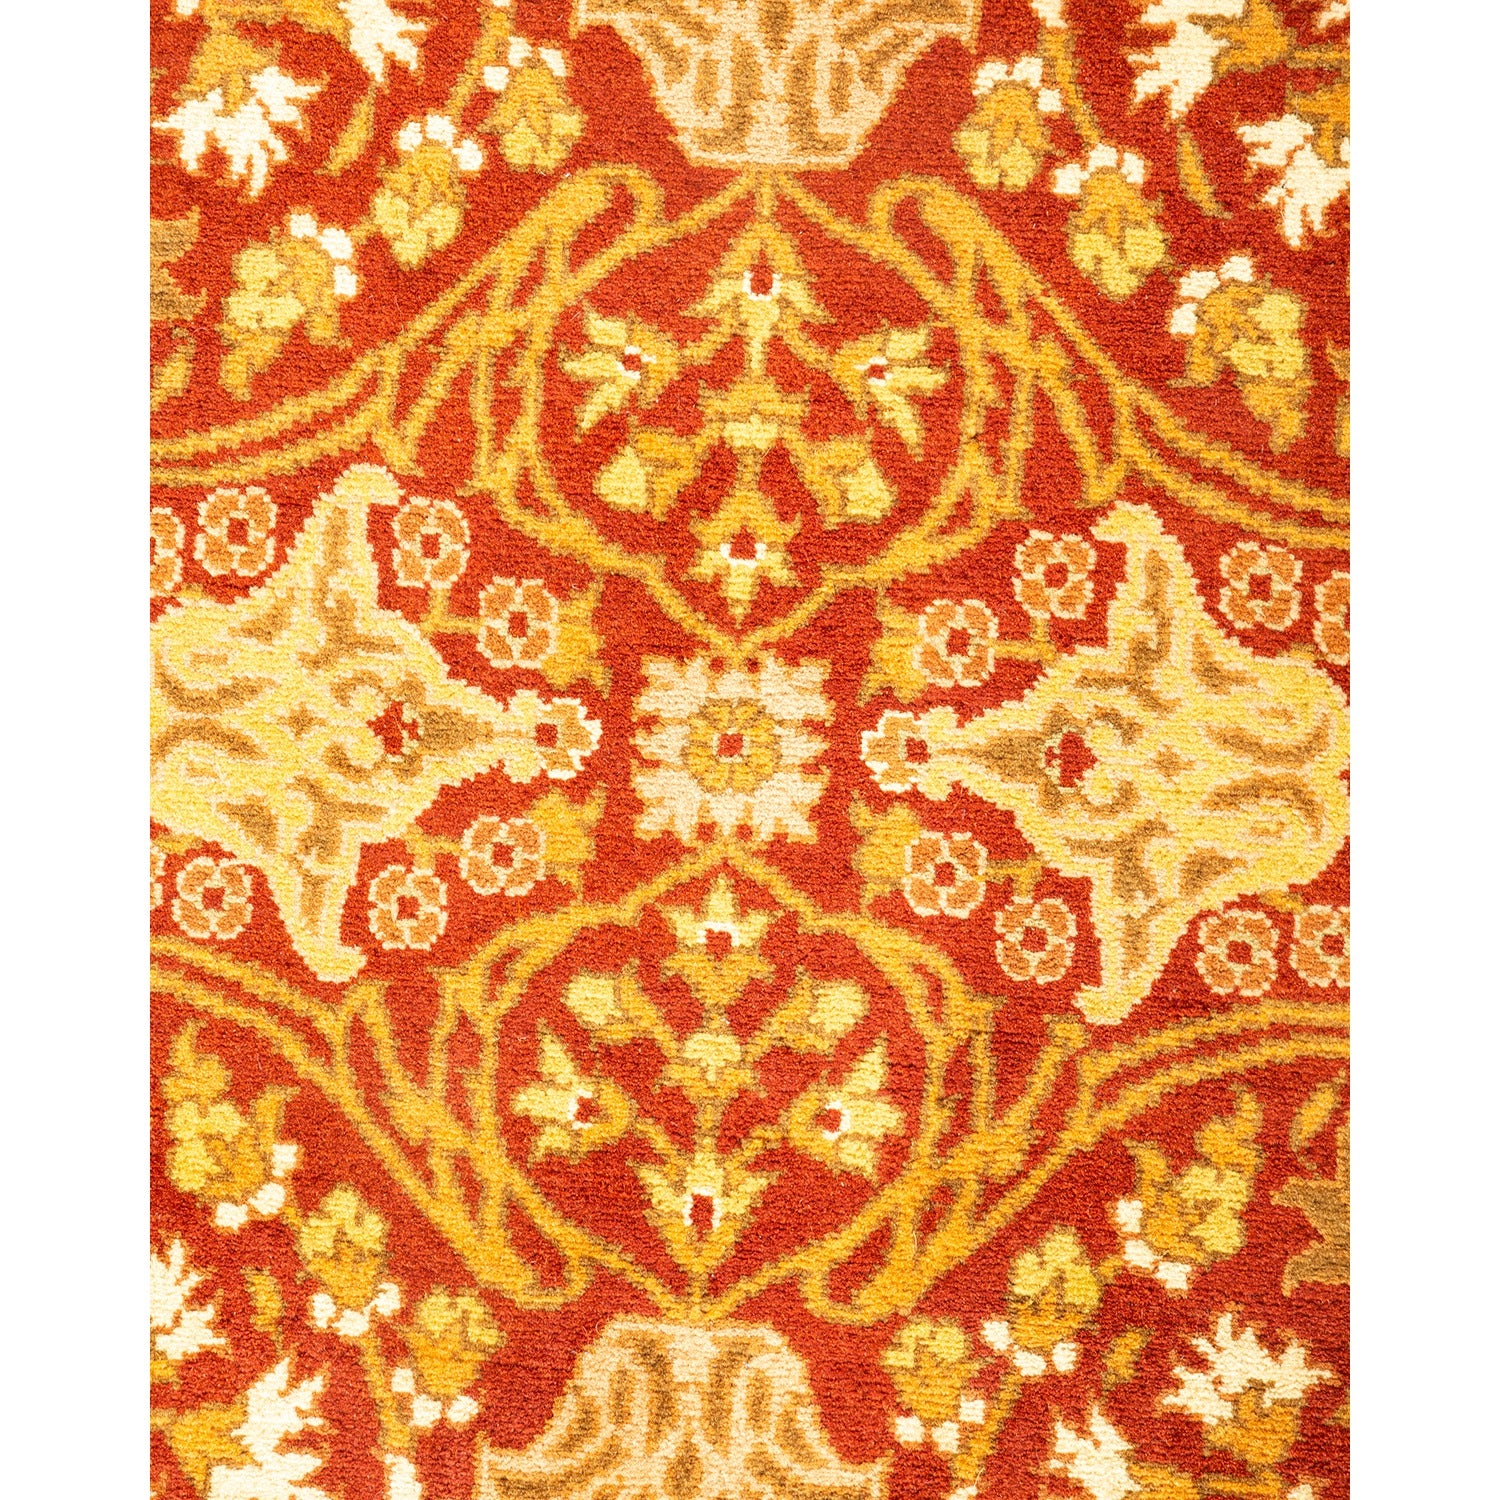 Rich rust-colored carpet with intricate Middle Eastern-inspired design.